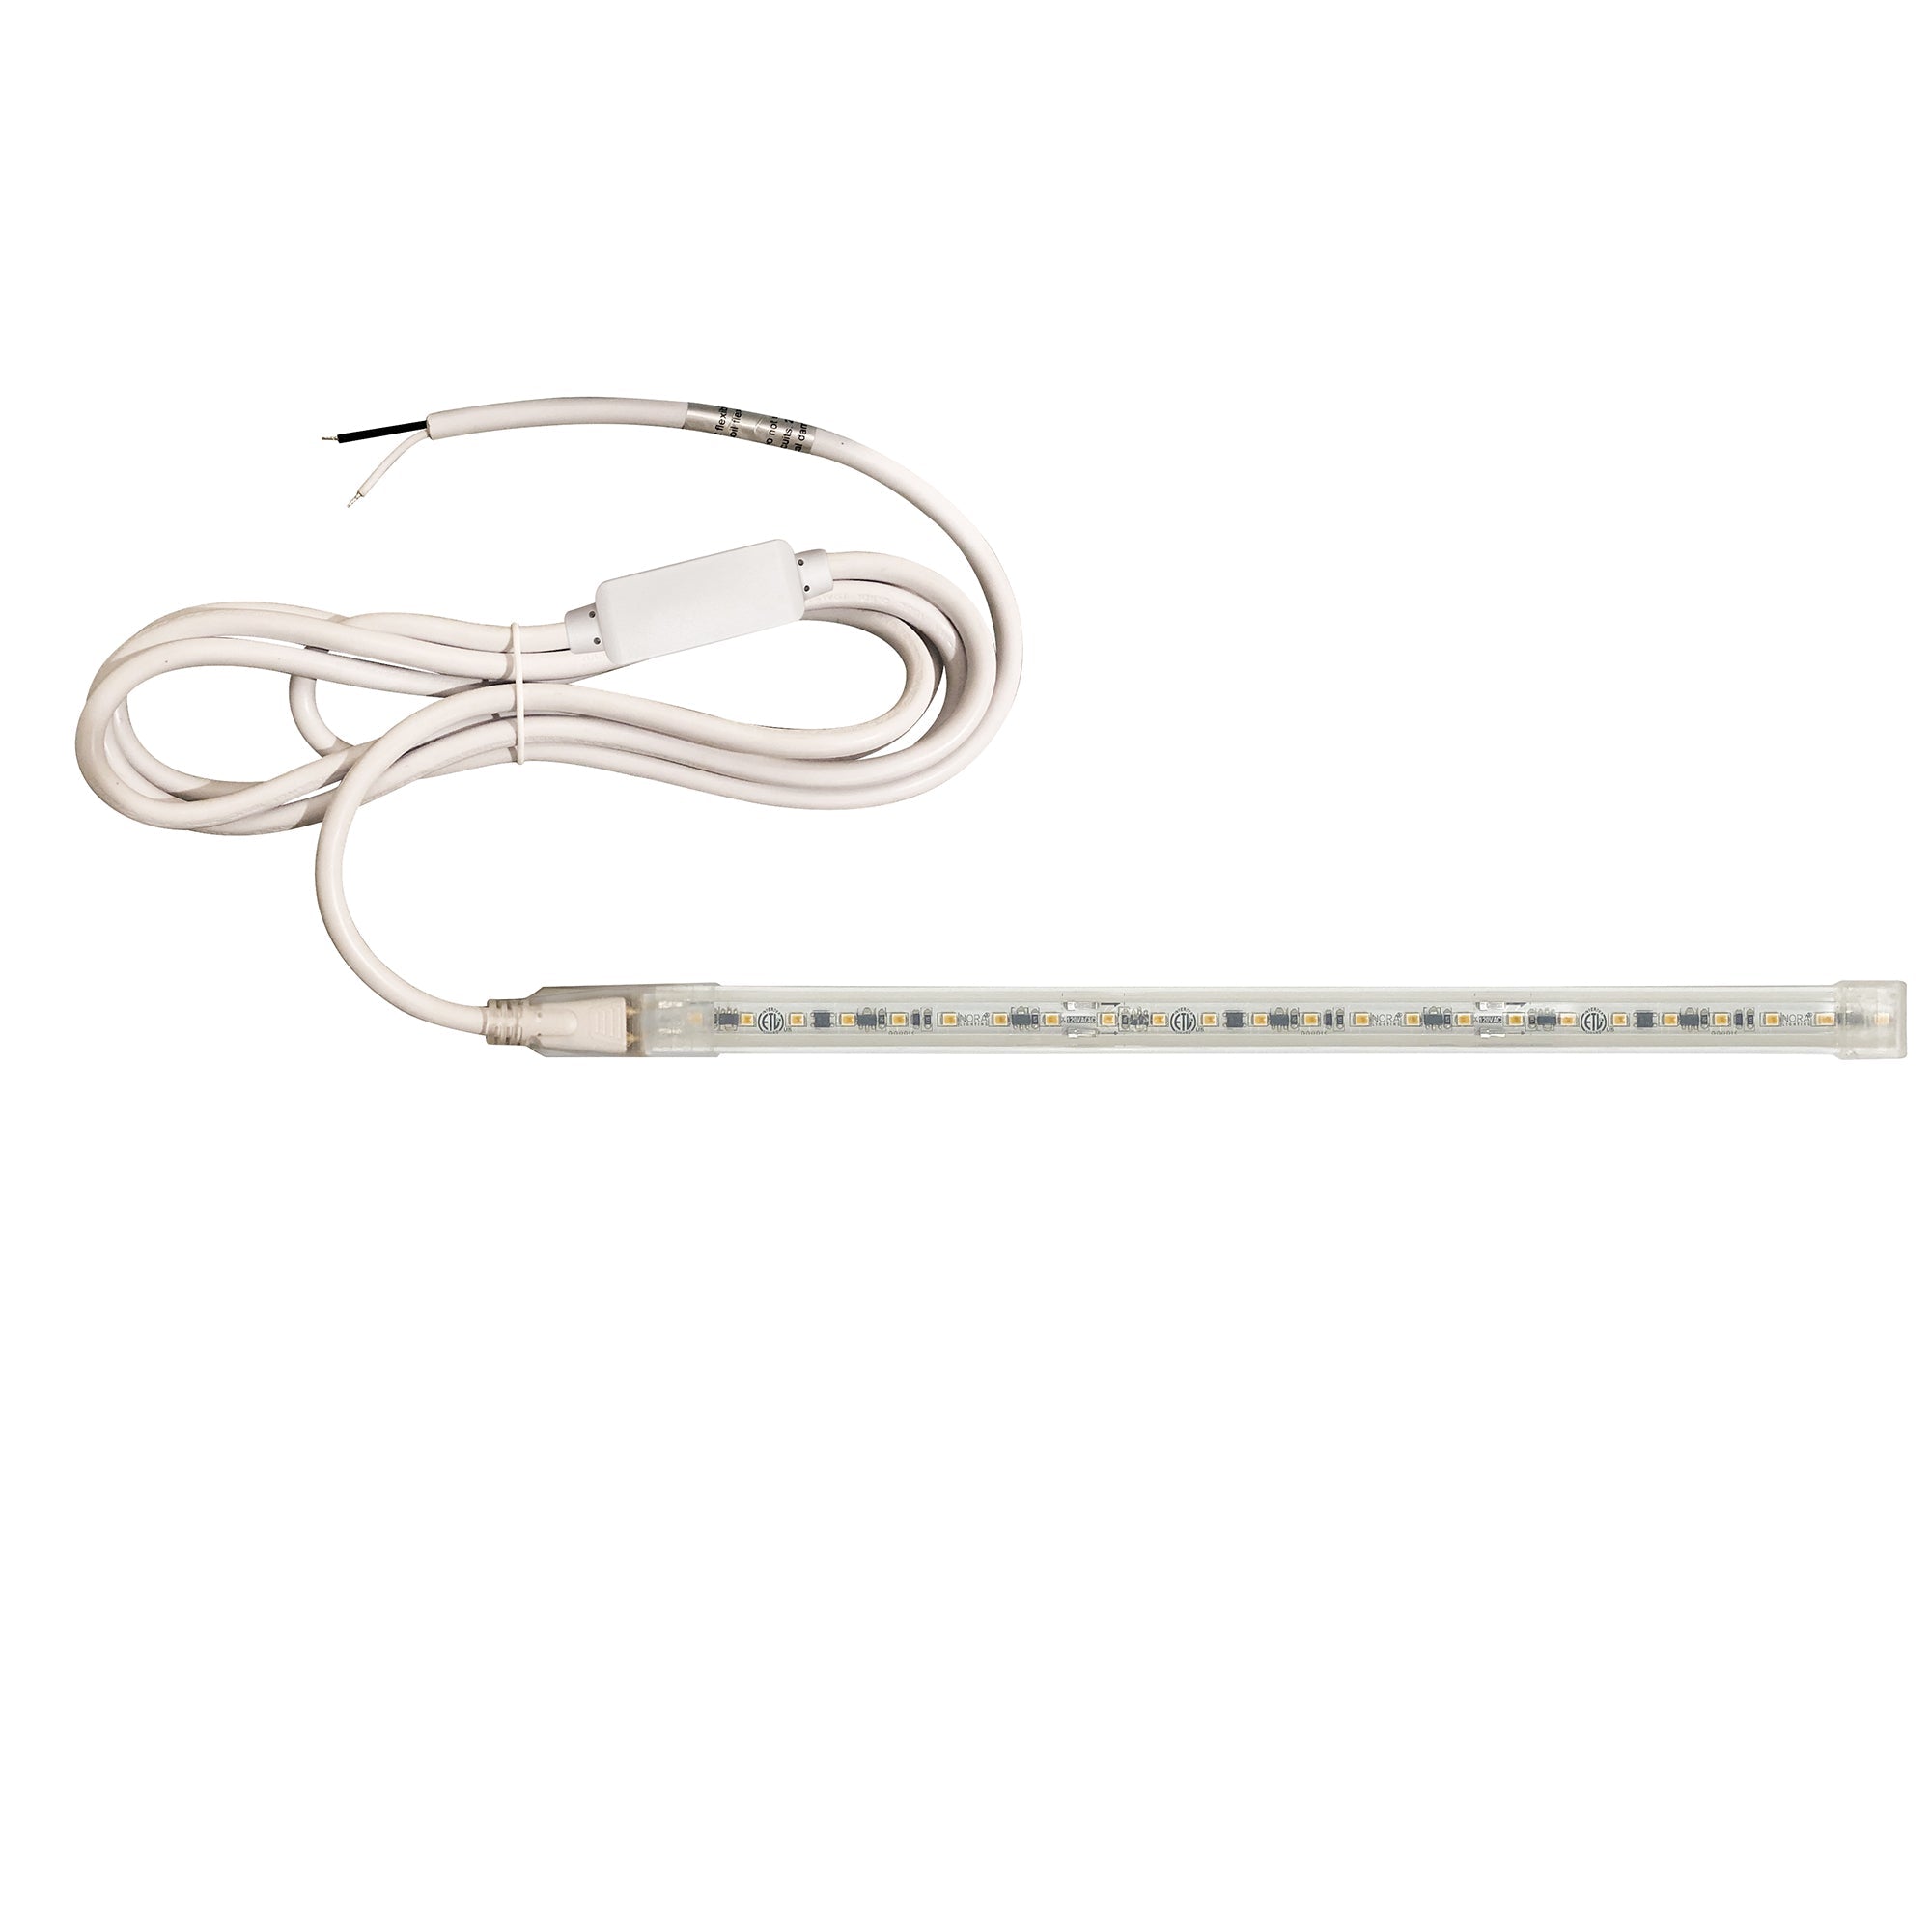 Nora Lighting NUTP13-W65-4-12-930/HWSP - Accent / Undercabinet - Custom Cut 65-ft, 4-in 120V Continuous LED Tape Light, 330lm / 3.6W per foot, 3000K, w/ Mounting Clips and 8' Hardwired Power Cord w/ Surge Protector